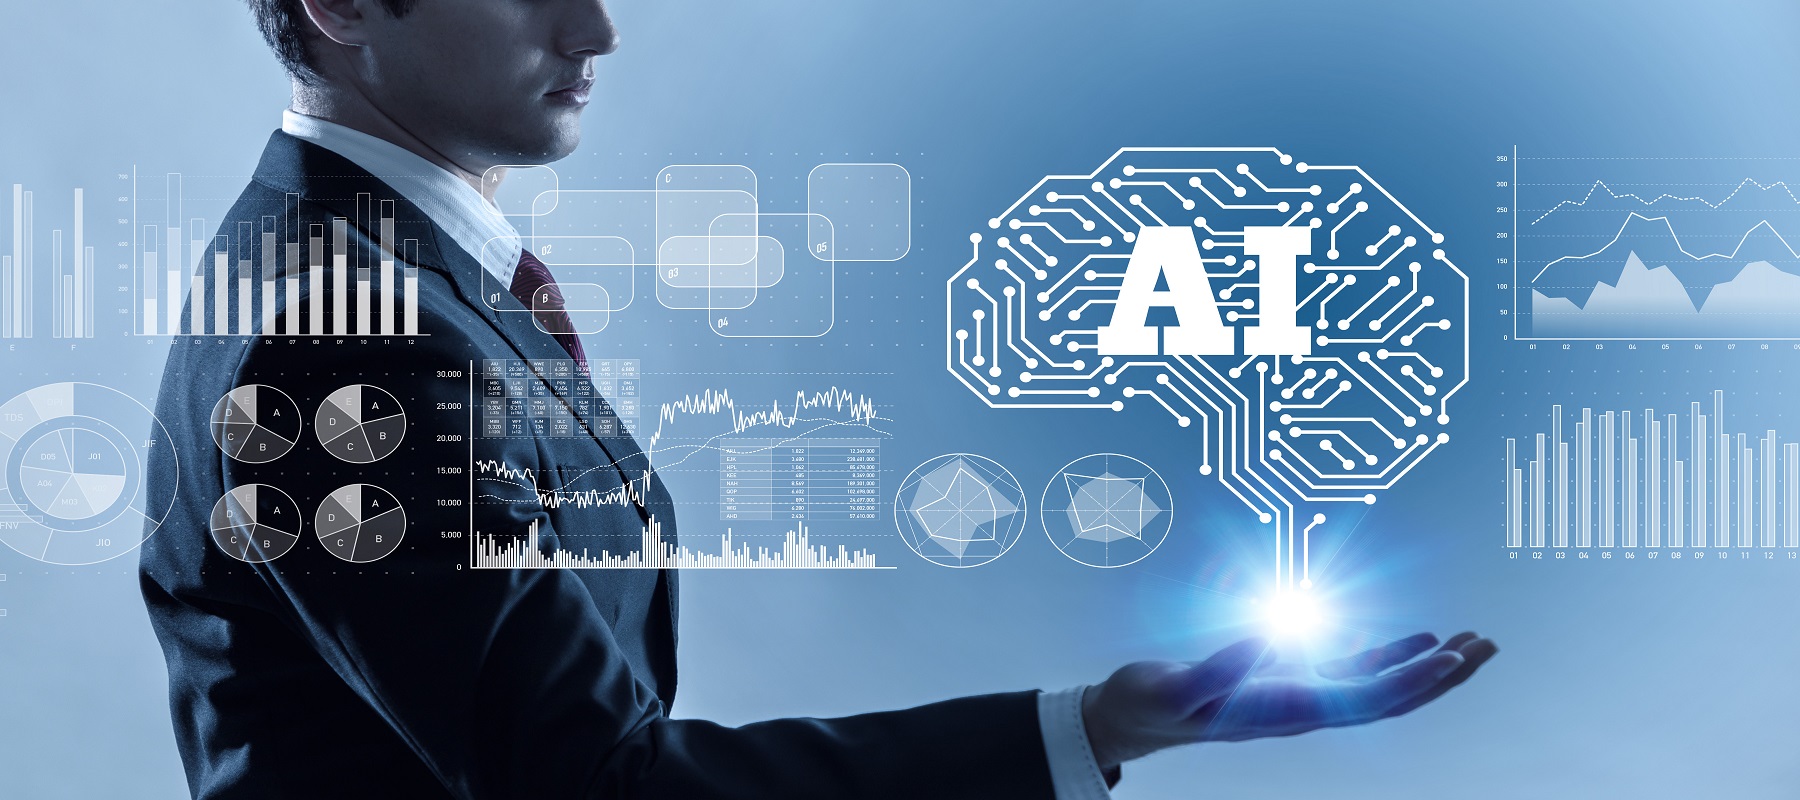 Artificial Intelligence Industry Association Launches in Cape Town